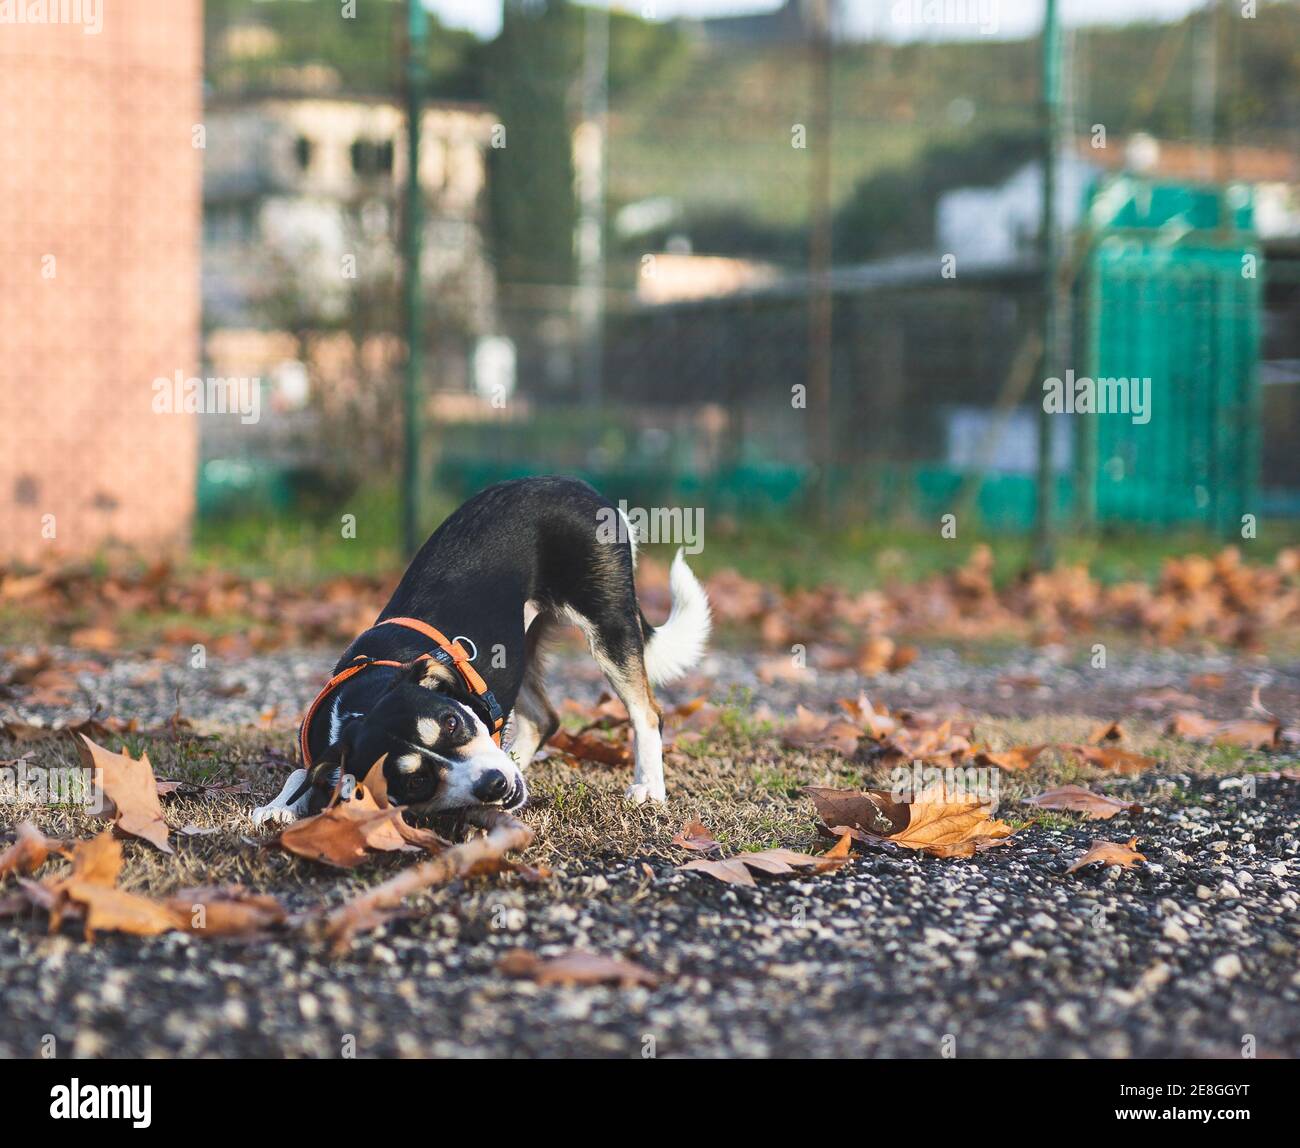 A SMALL DOG BLACK AND WHITE PLAYING IN THE PARK IN AUTUMN Stock Photo